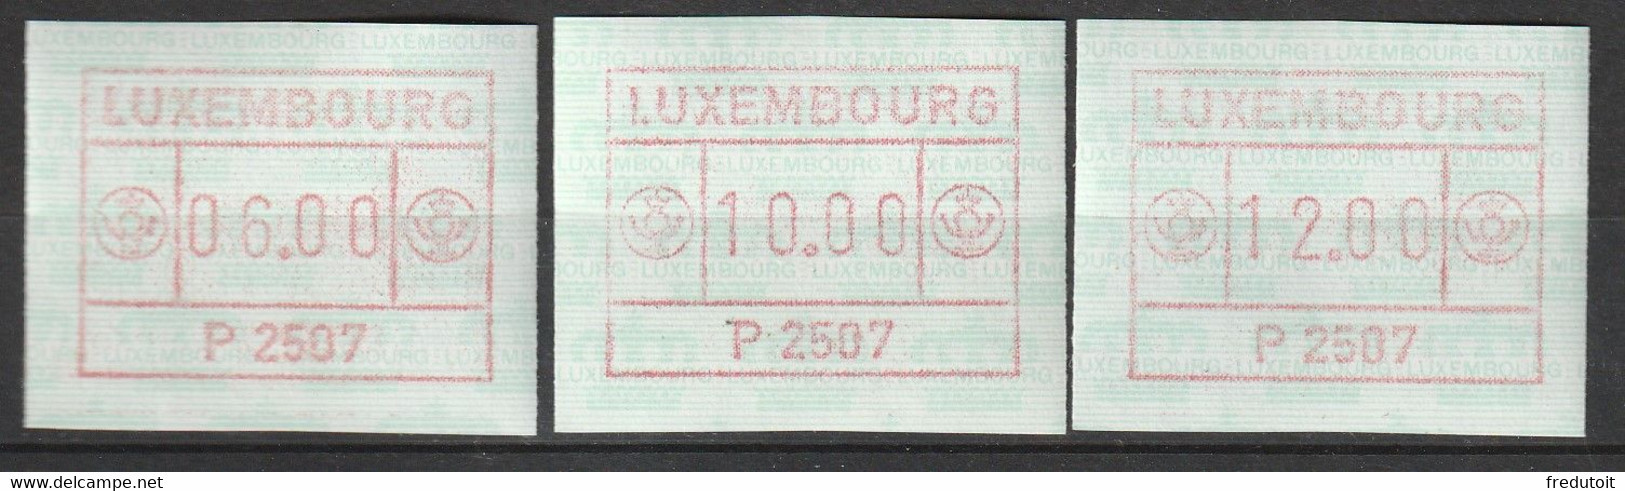 LUXEMBOURG - Timbres De Distributeurs - N°1 (1983) P2507 - Postage Labels